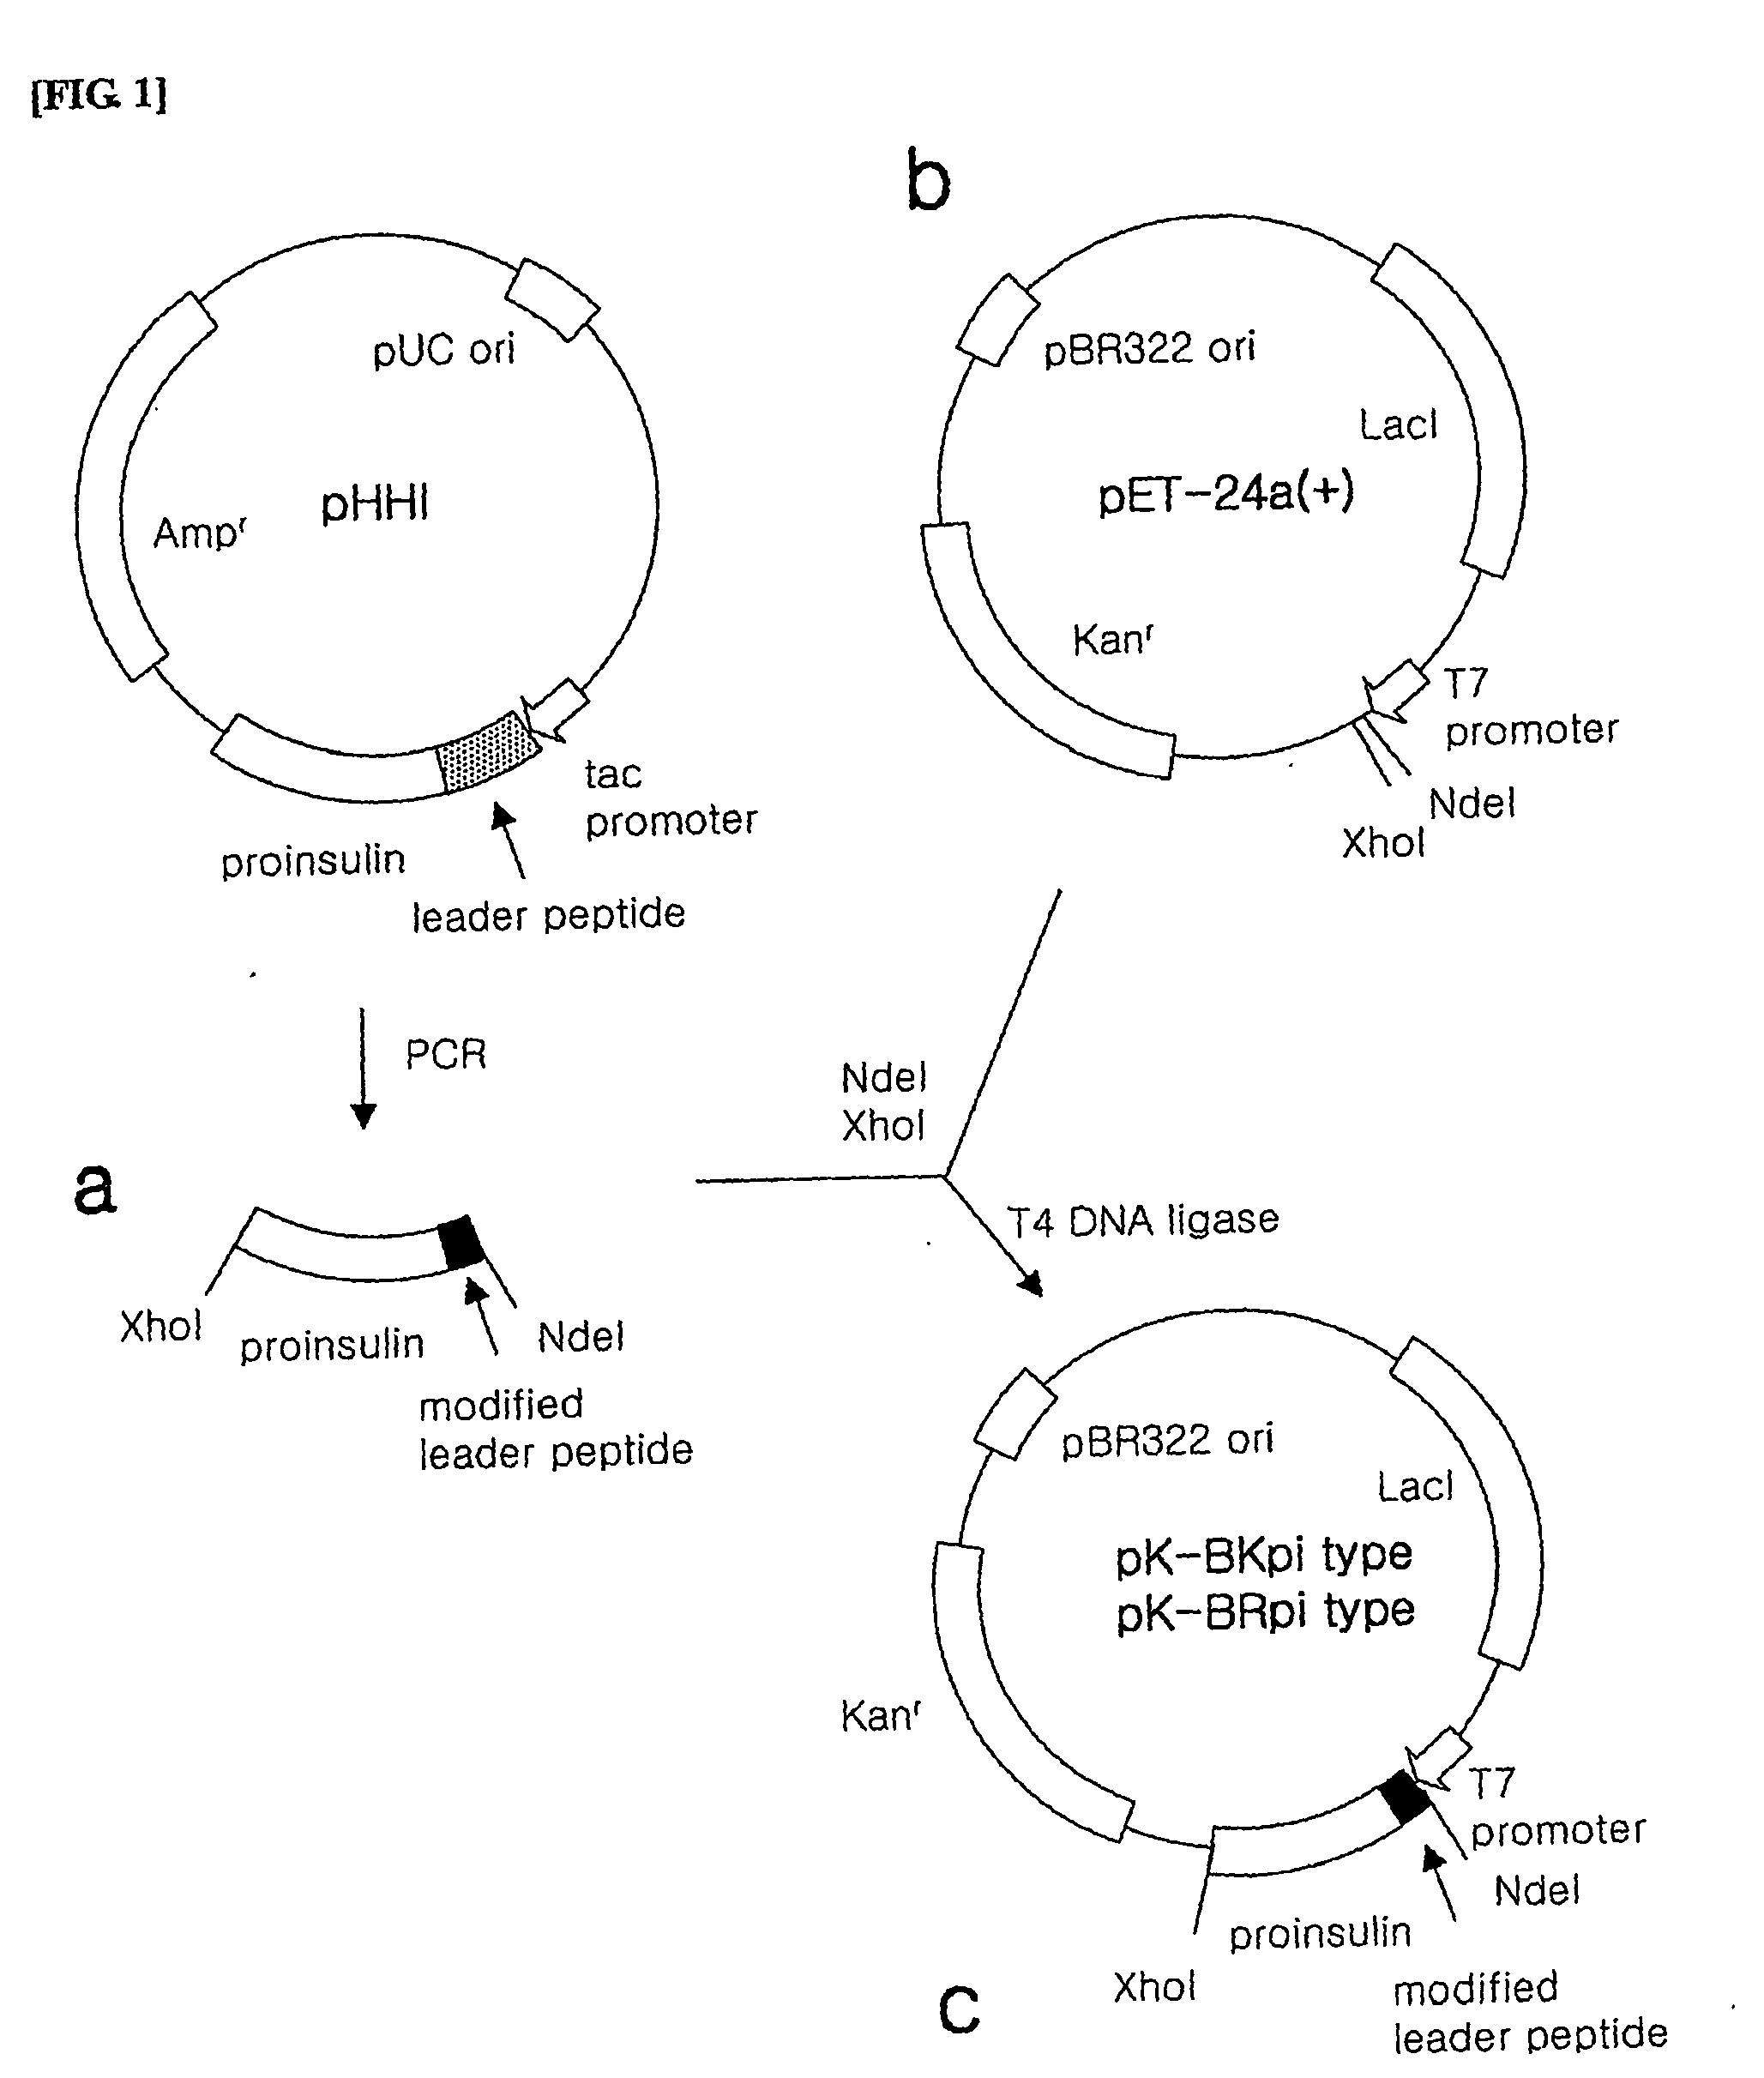 Plasmids expressing human insulin and the preparation method for human insuling thereby